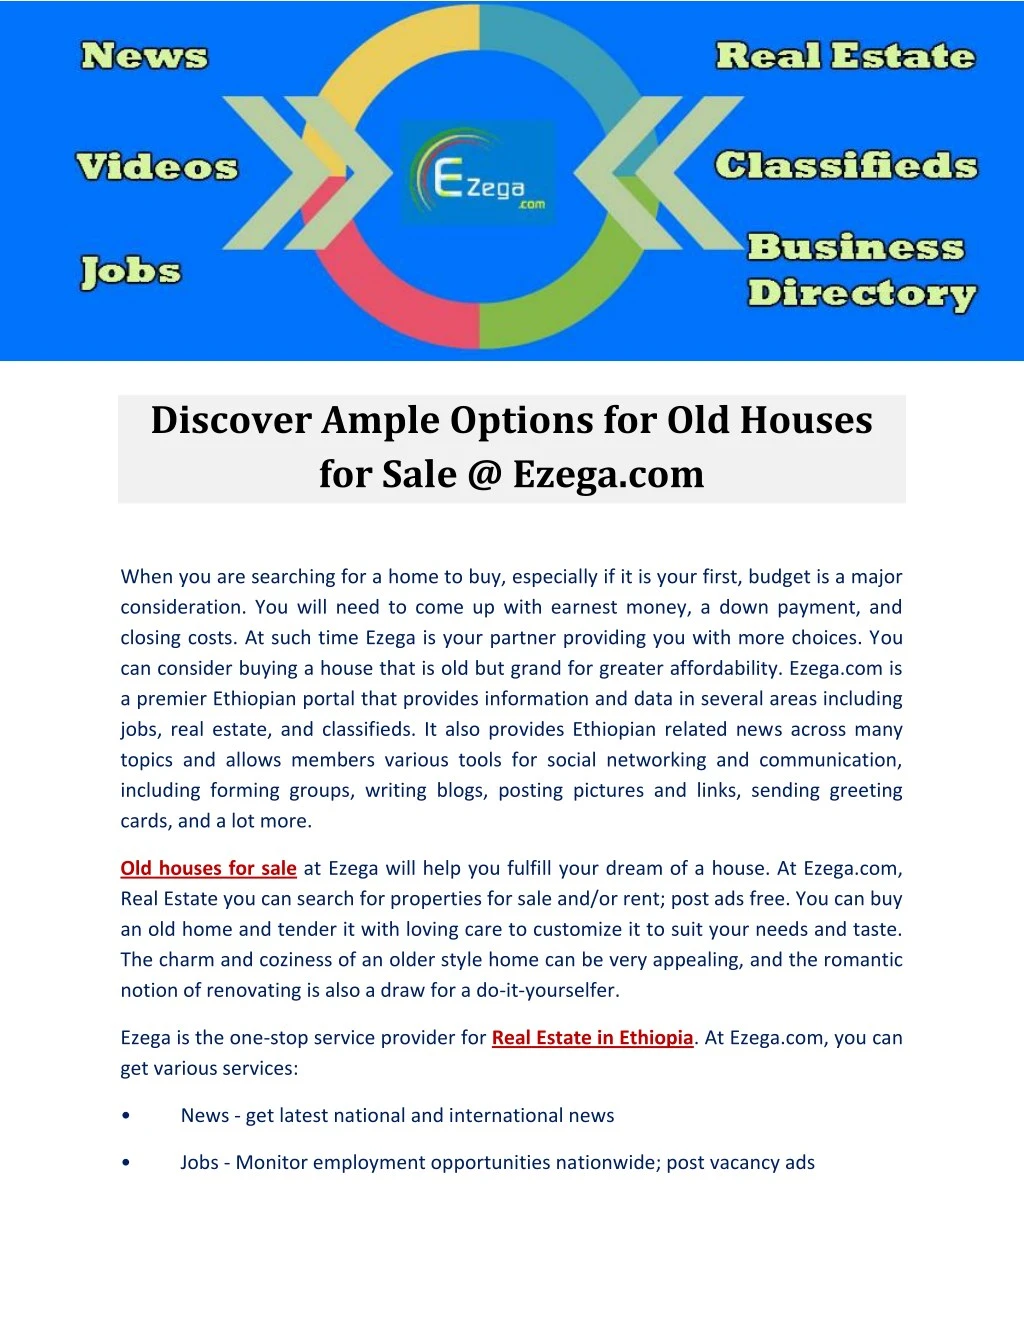 discover ample options for old houses for sale